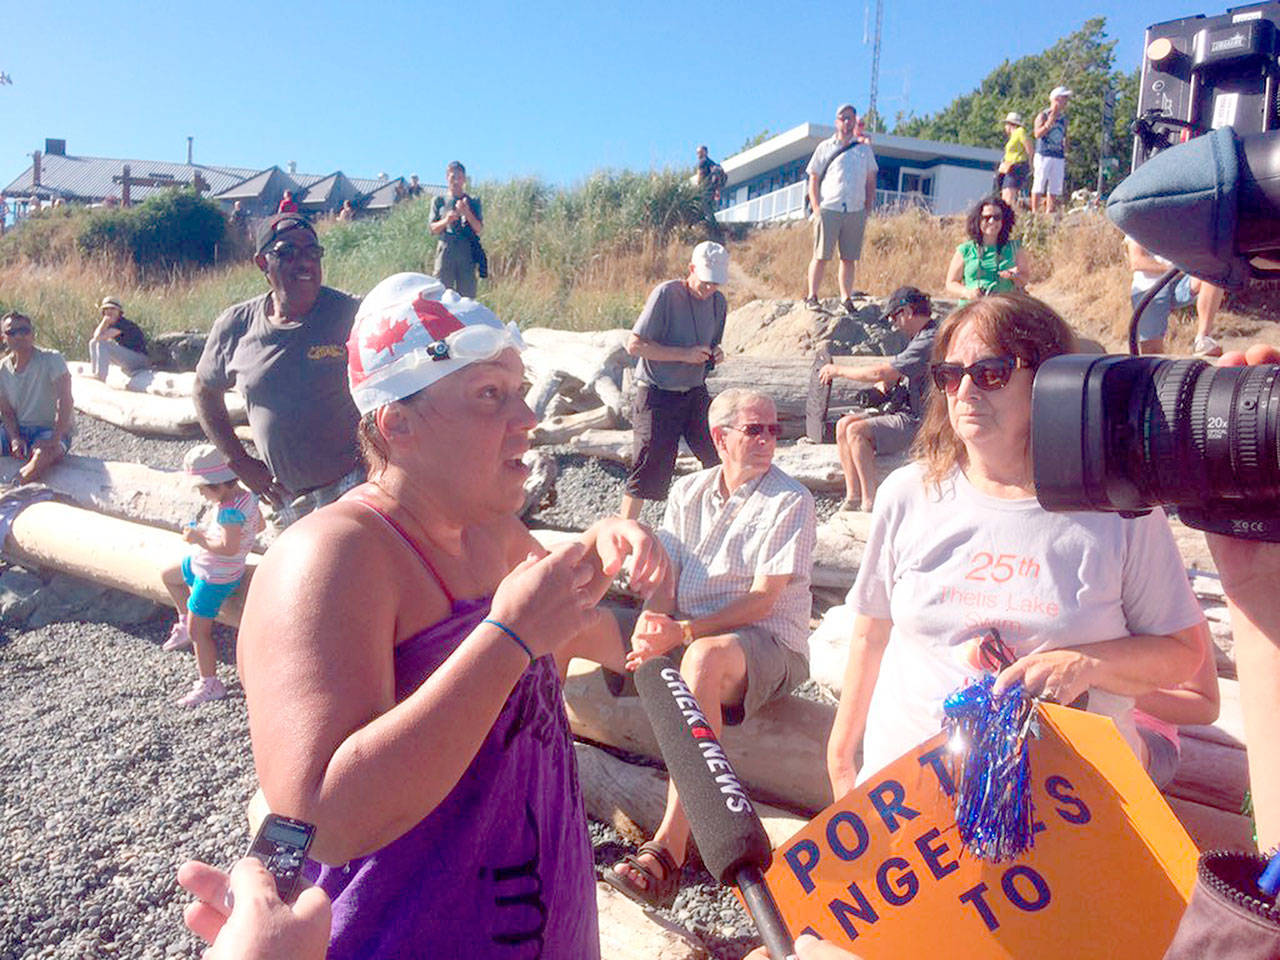 Susan Simmons of Victoria talks to news media after becoming the eighth person known to swim across the Strait of Juan de Fuca on Monday. (Travis Paterson/Saanich News)